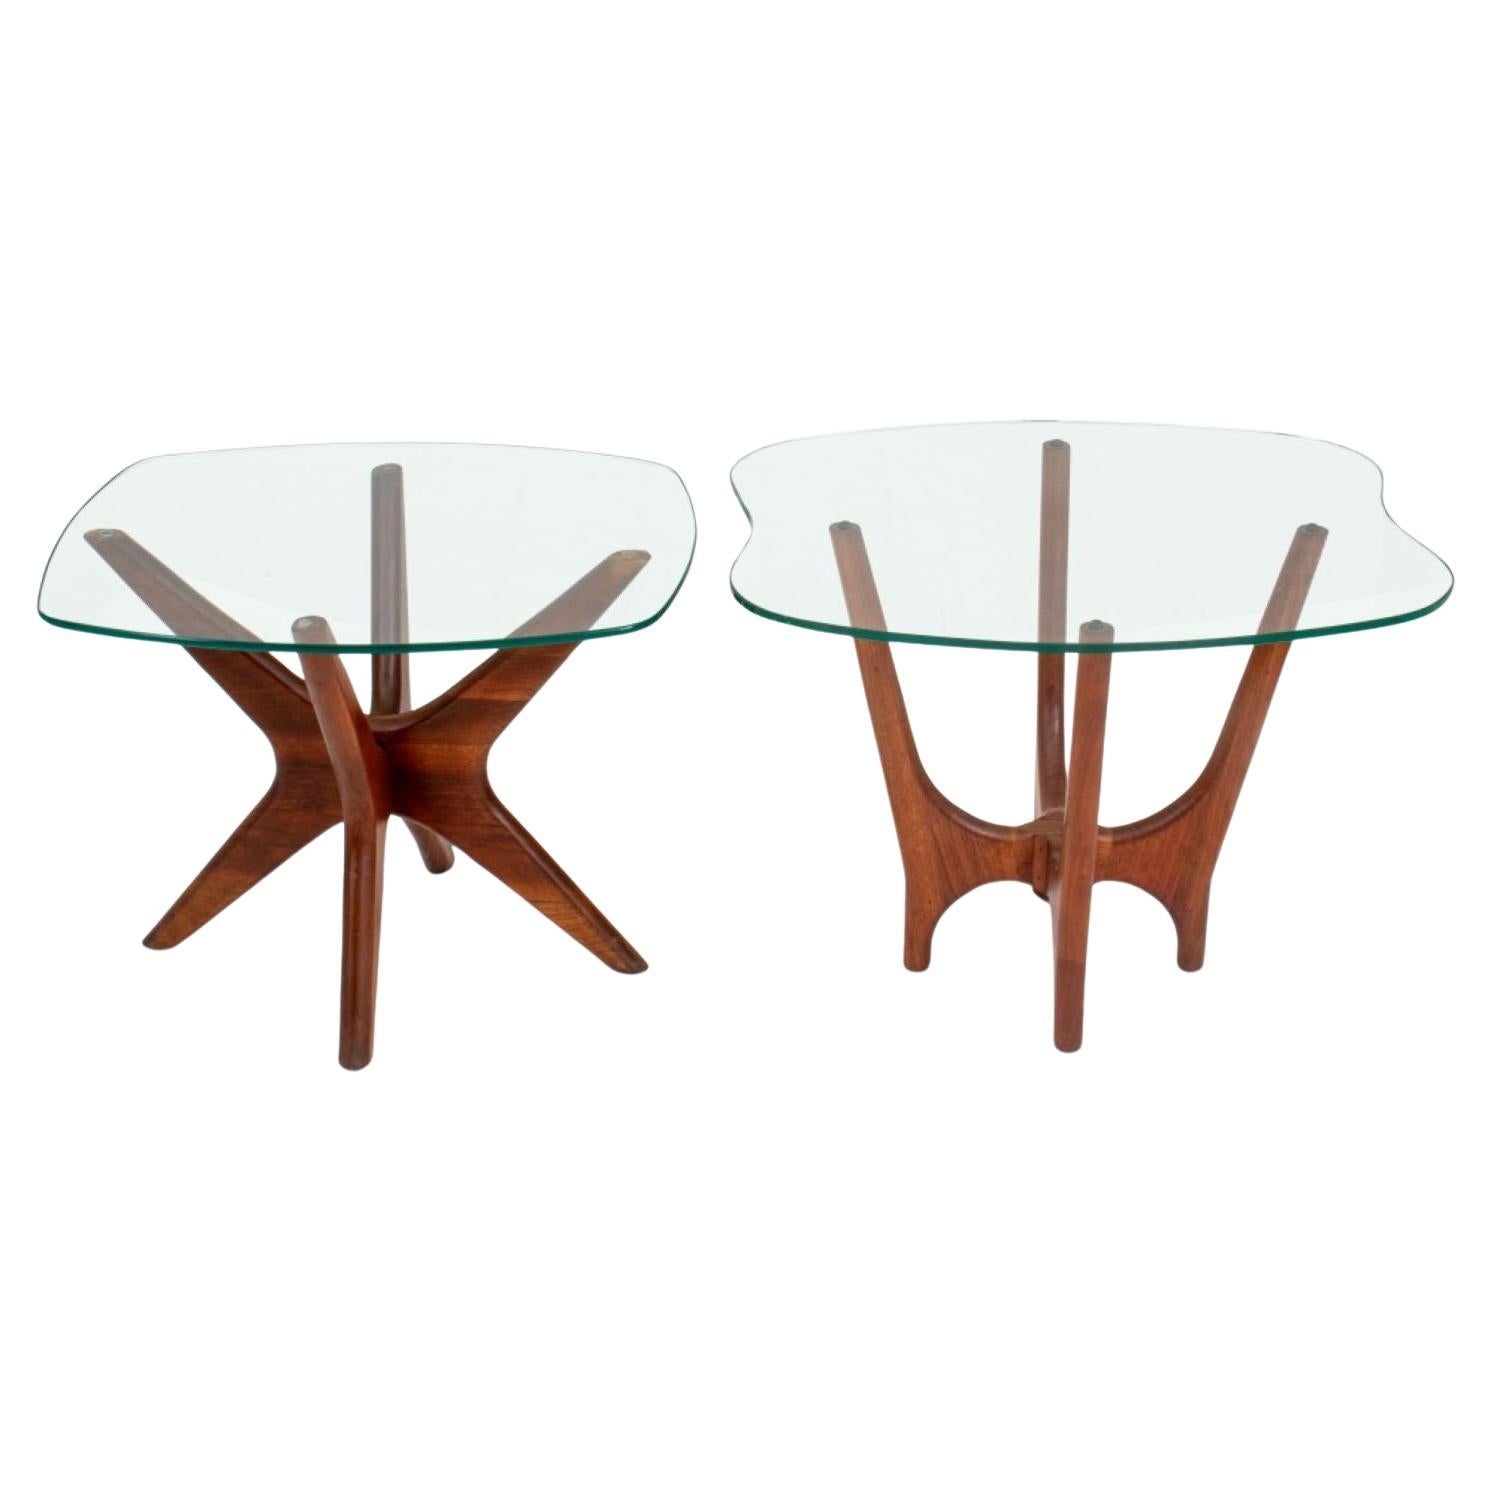 Adrian Pearsall Mid-Century Modern End Tables, 2